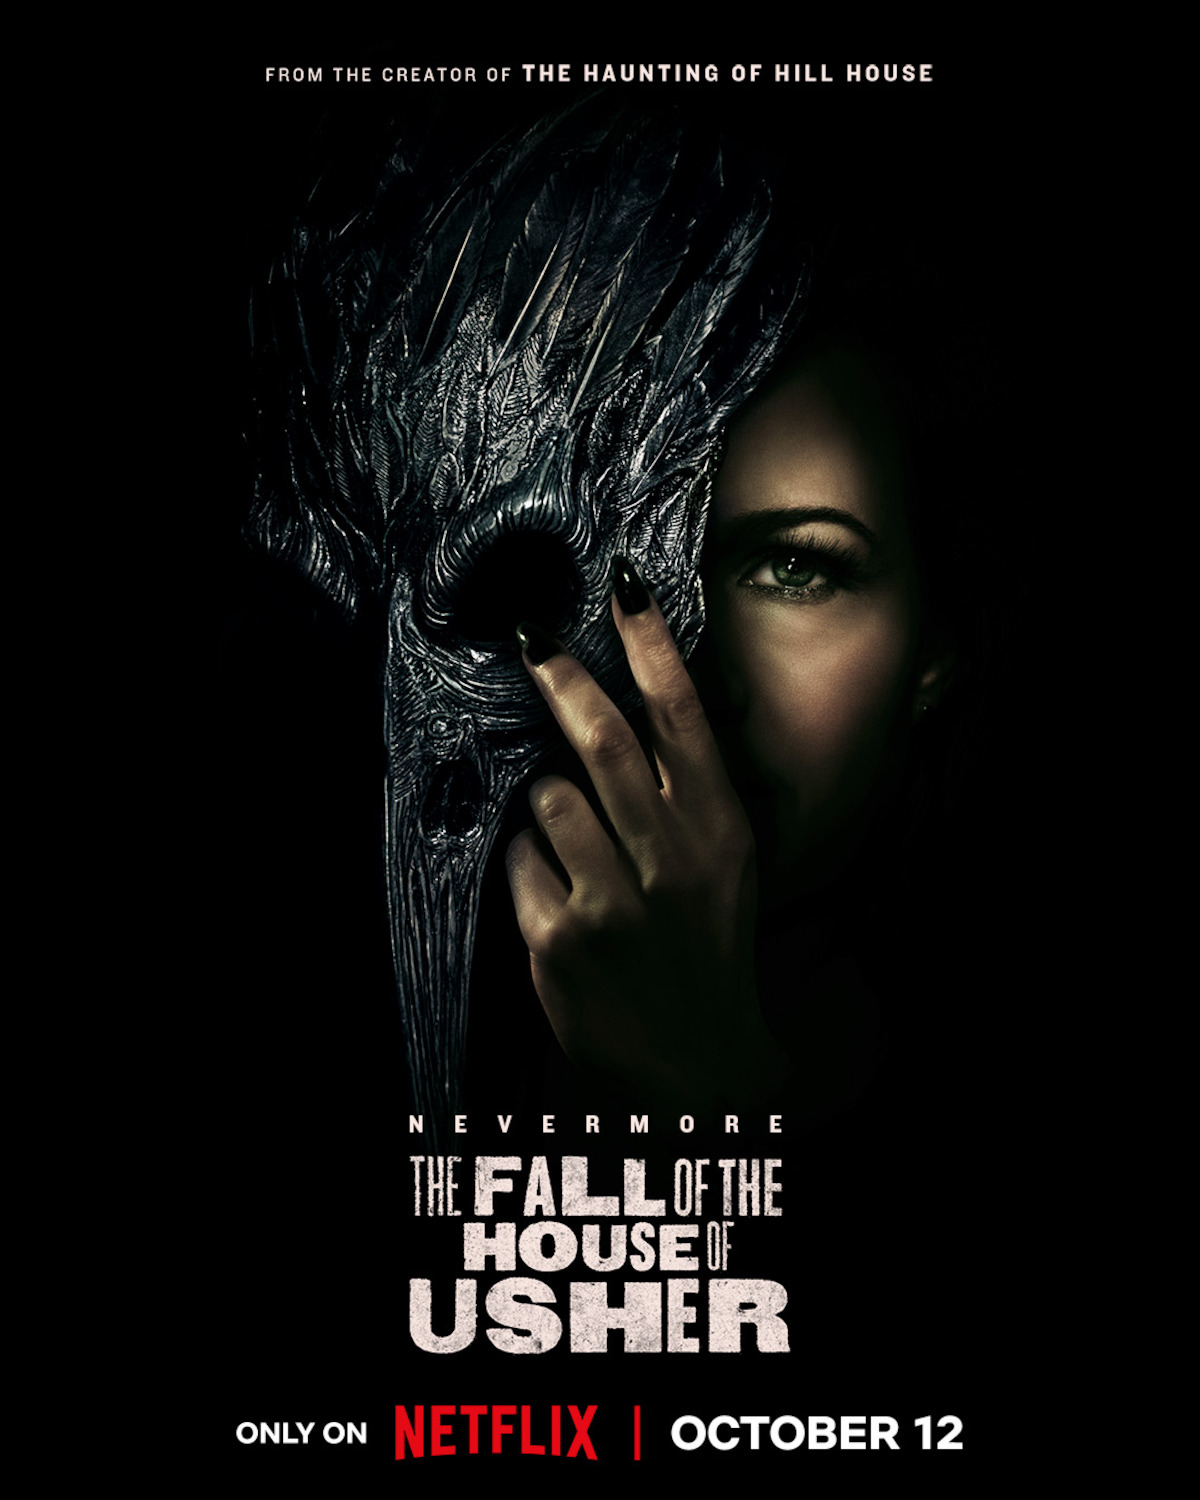 The Fall of the House of Usher Cast, News, Videos and more